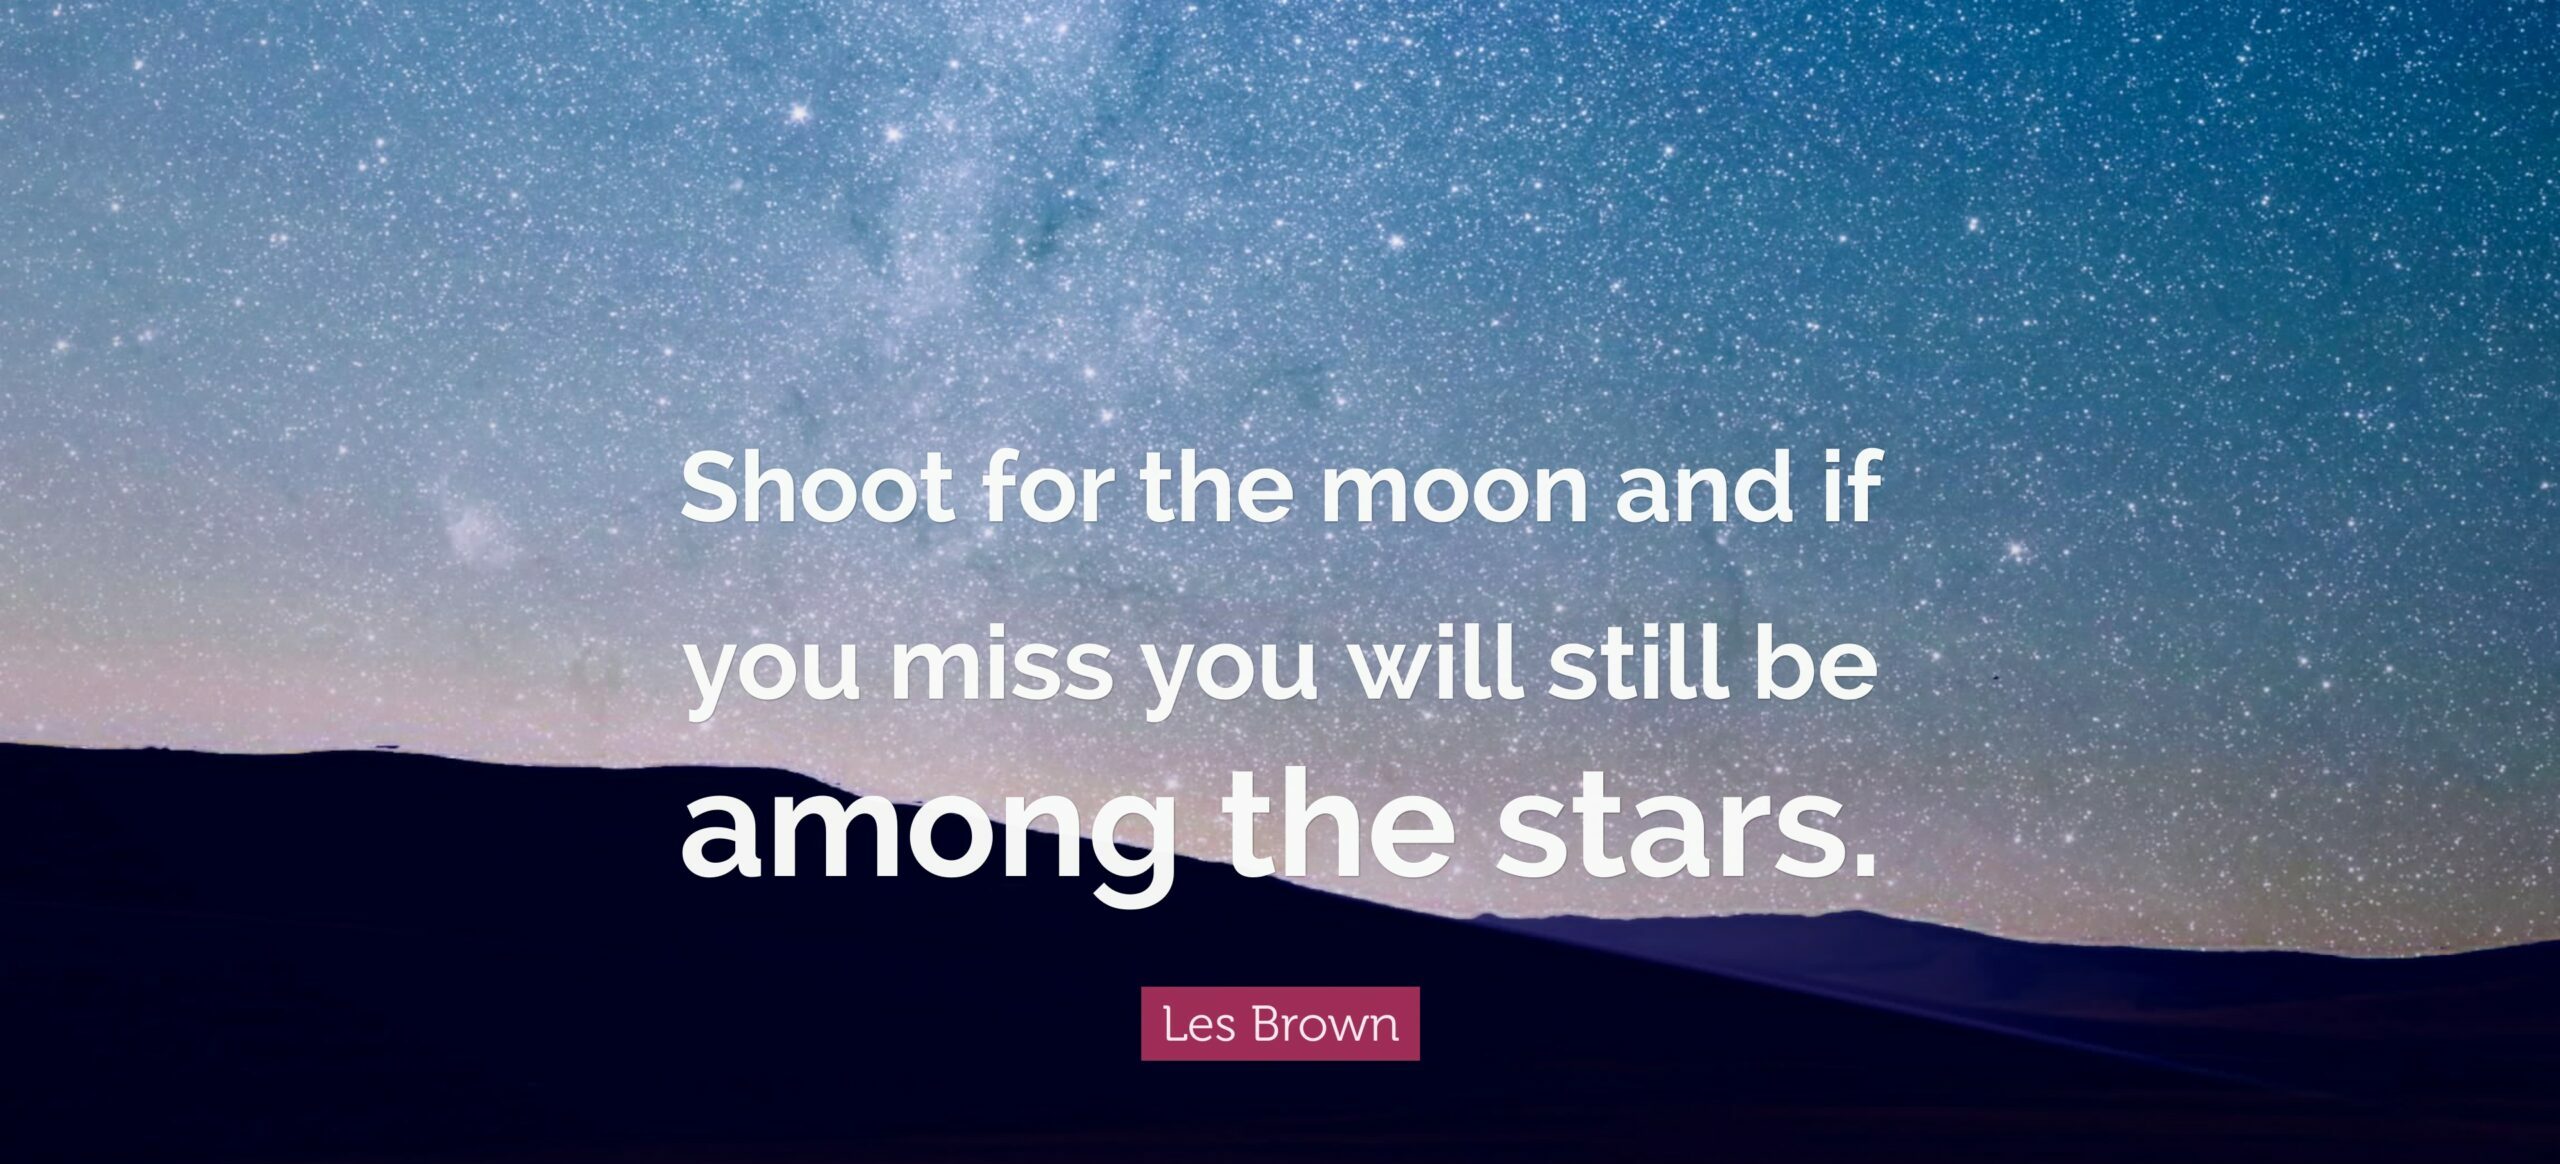 les brown Shoot for the moon